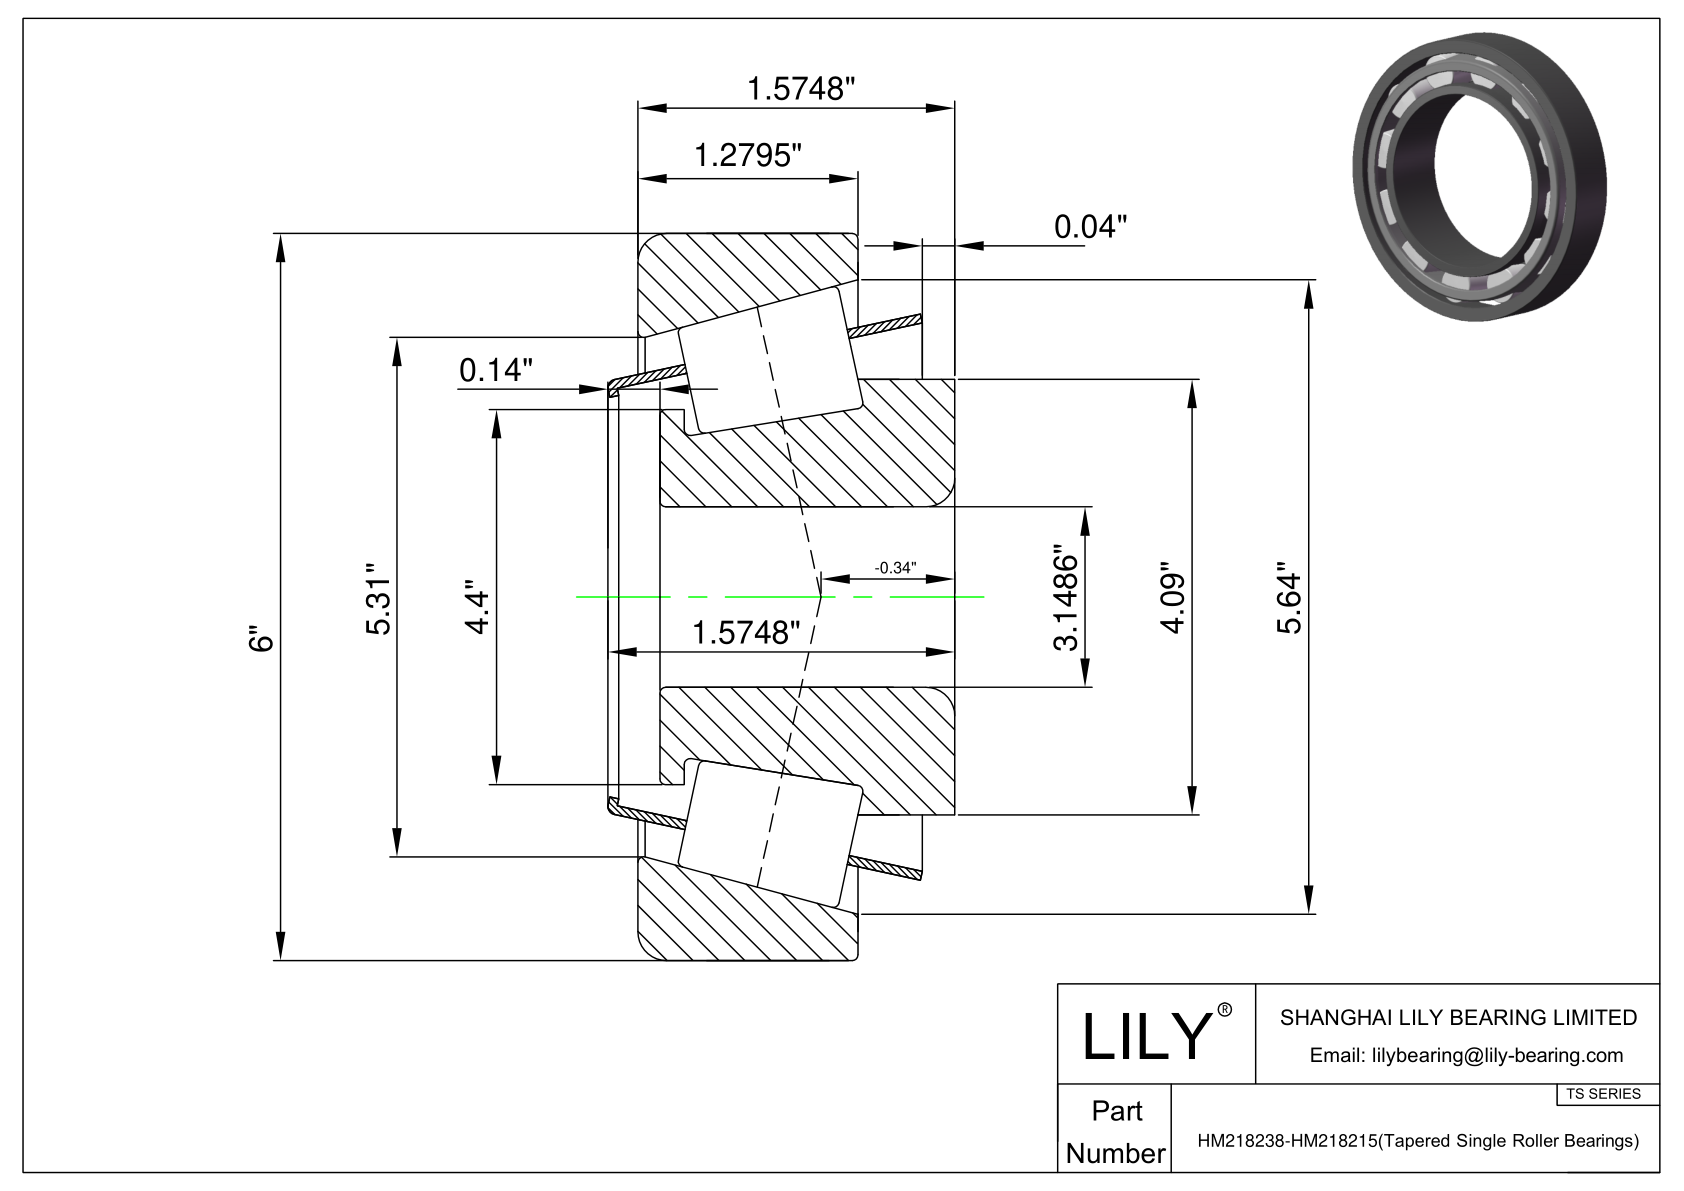 HM218238-HM218215 TS (Tapered Single Roller Bearings) (Imperial) cad drawing